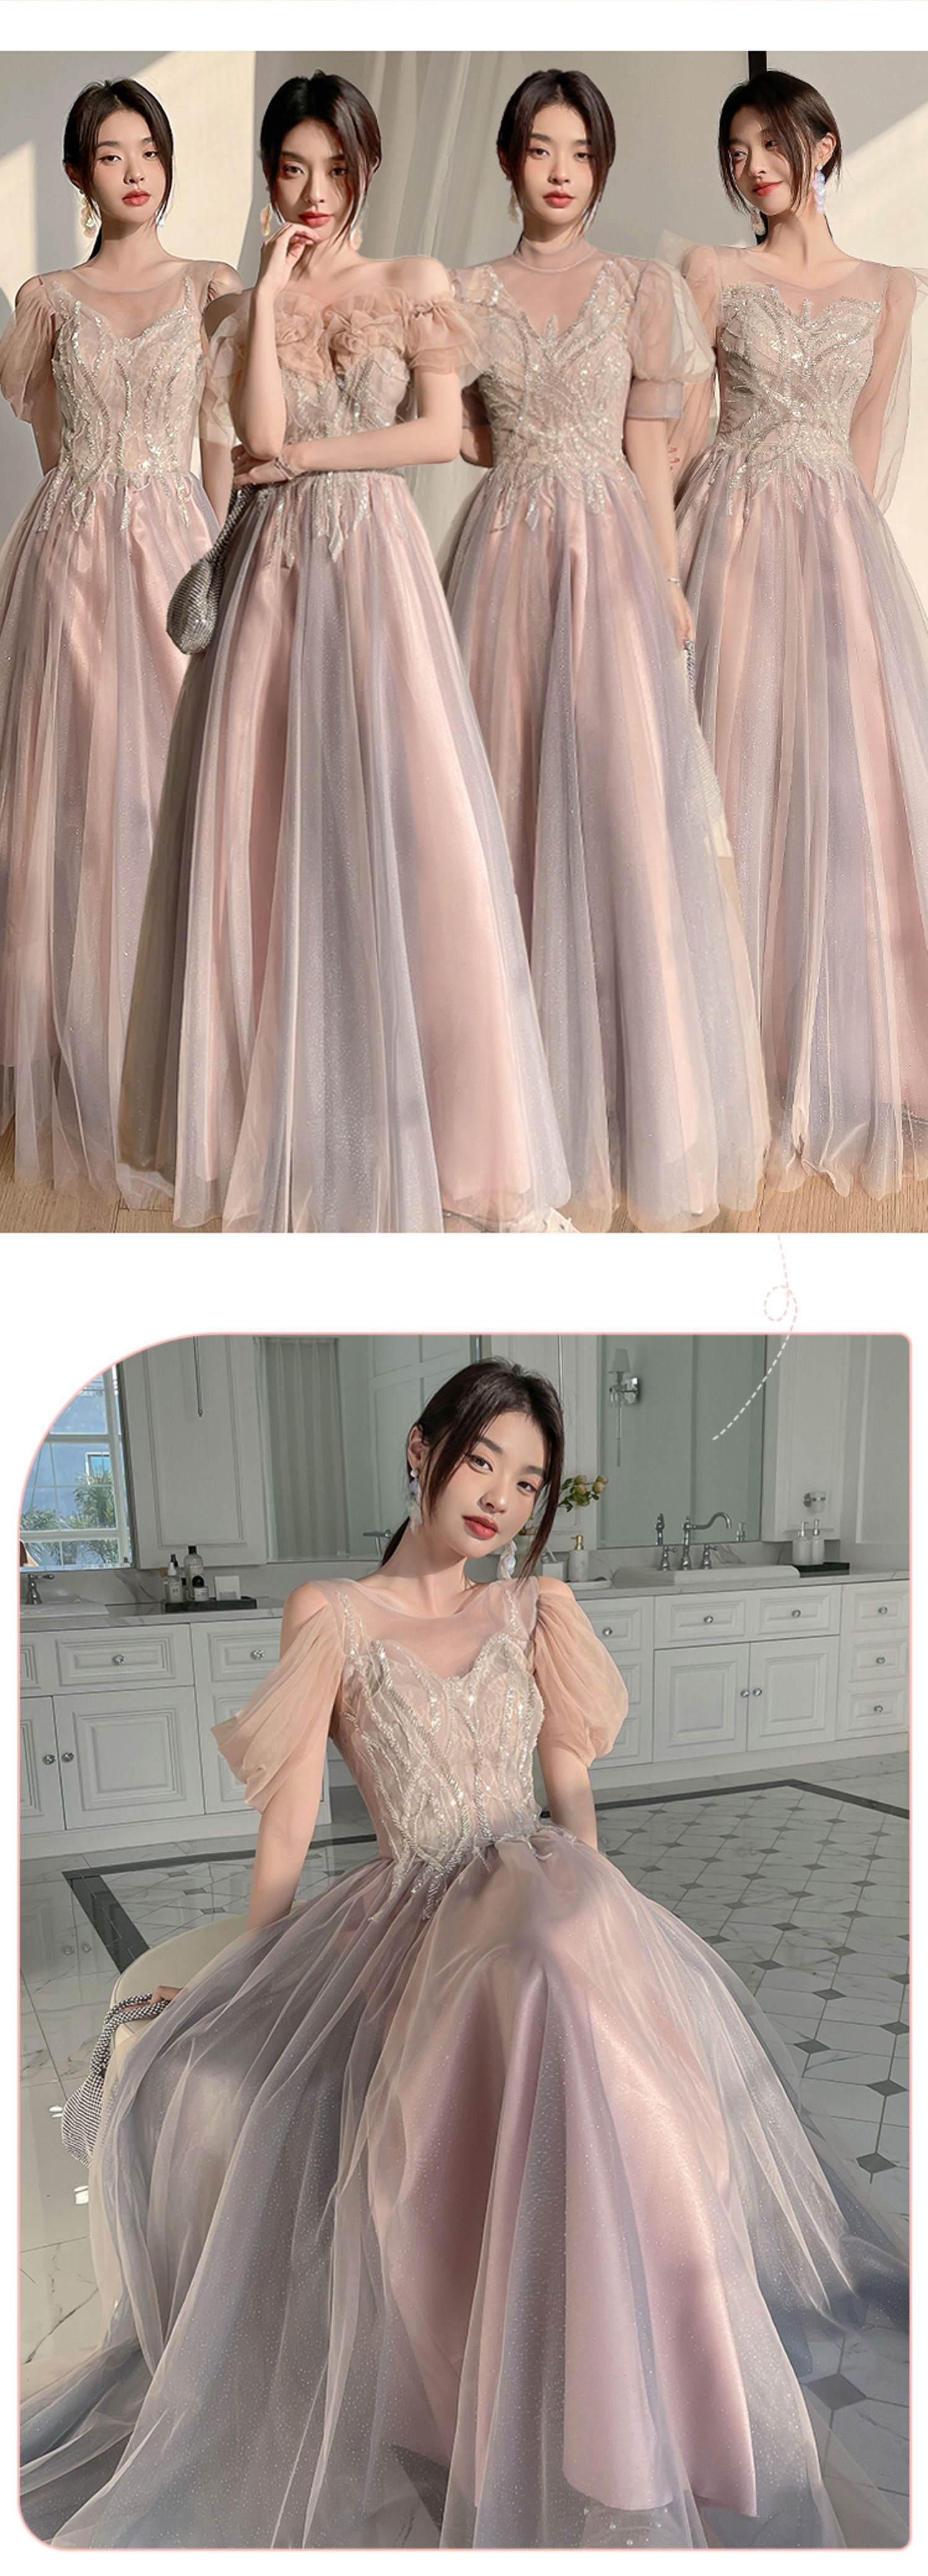 Elegant-Pale-Pink-Maxi-Bridesmaid-Dress-Long-Party-Ball-Gown12